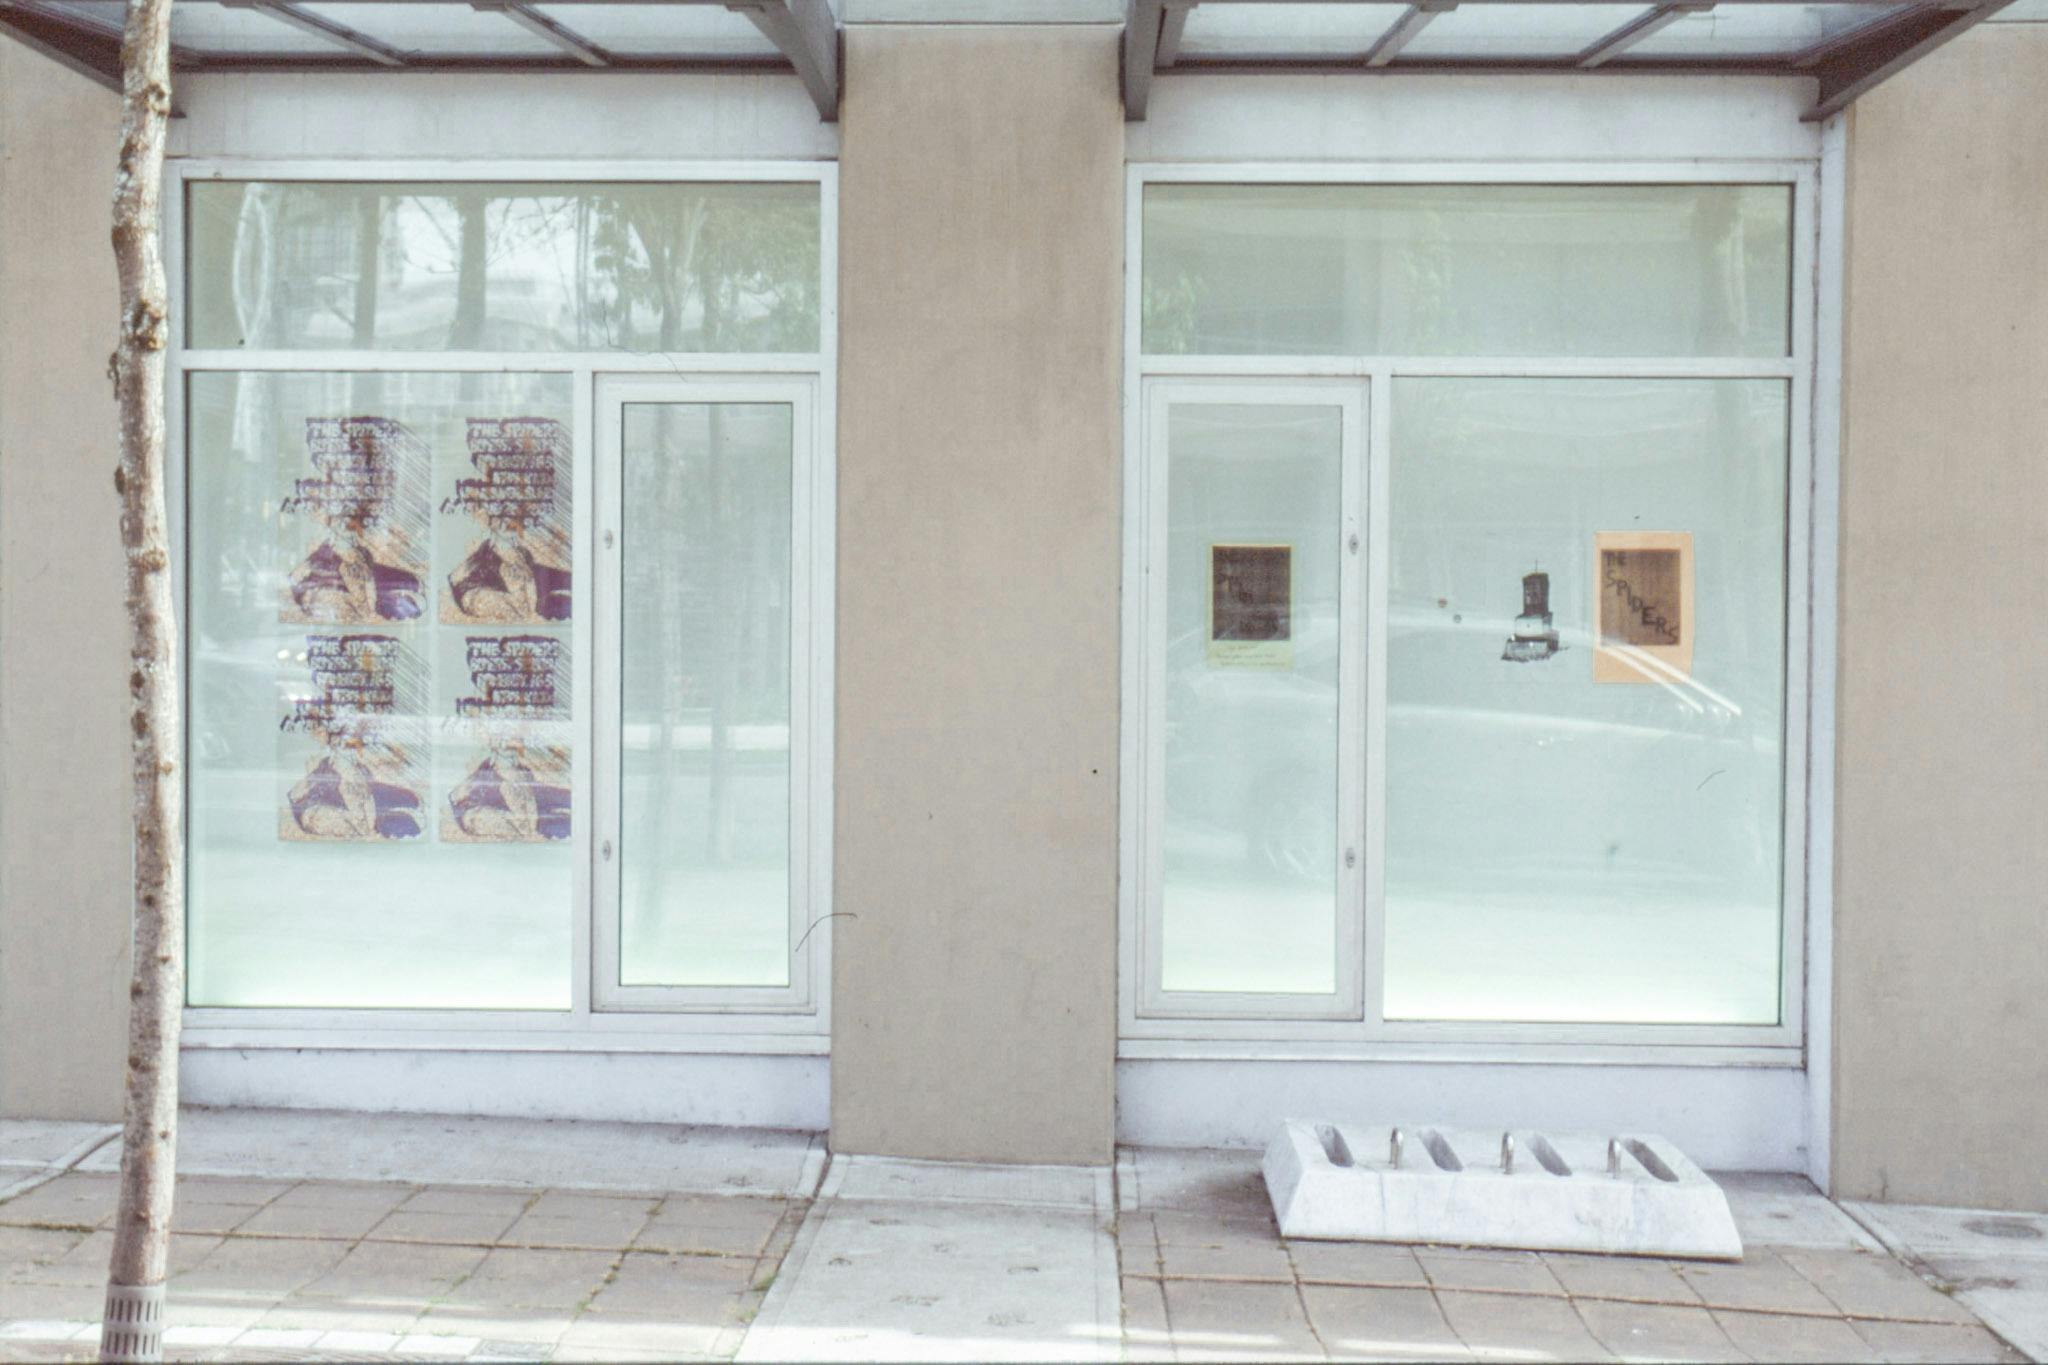 An install image of two-dimensional works in CAG’s window spaces facing Nelson Street. Exhibited works look like a collection of various ephemera such as posters and pamphlets.